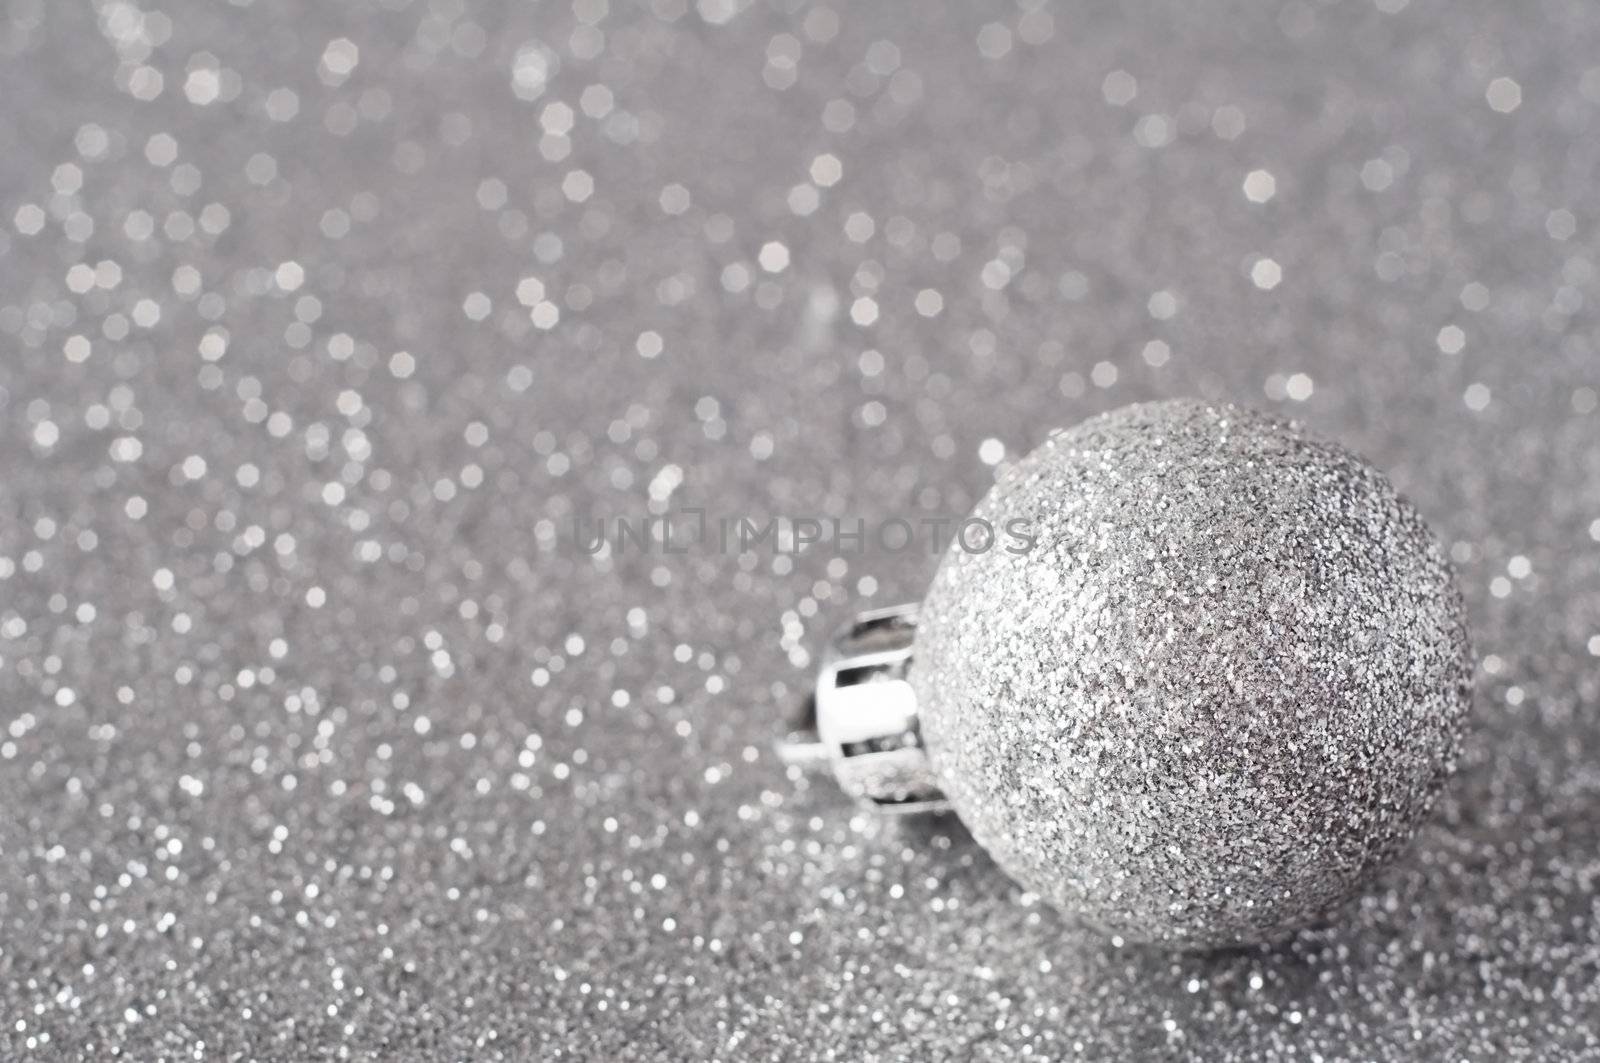 A single silver bauble, coated in glitter, resting on a silver glitter surface that softens into bokeh in the background.